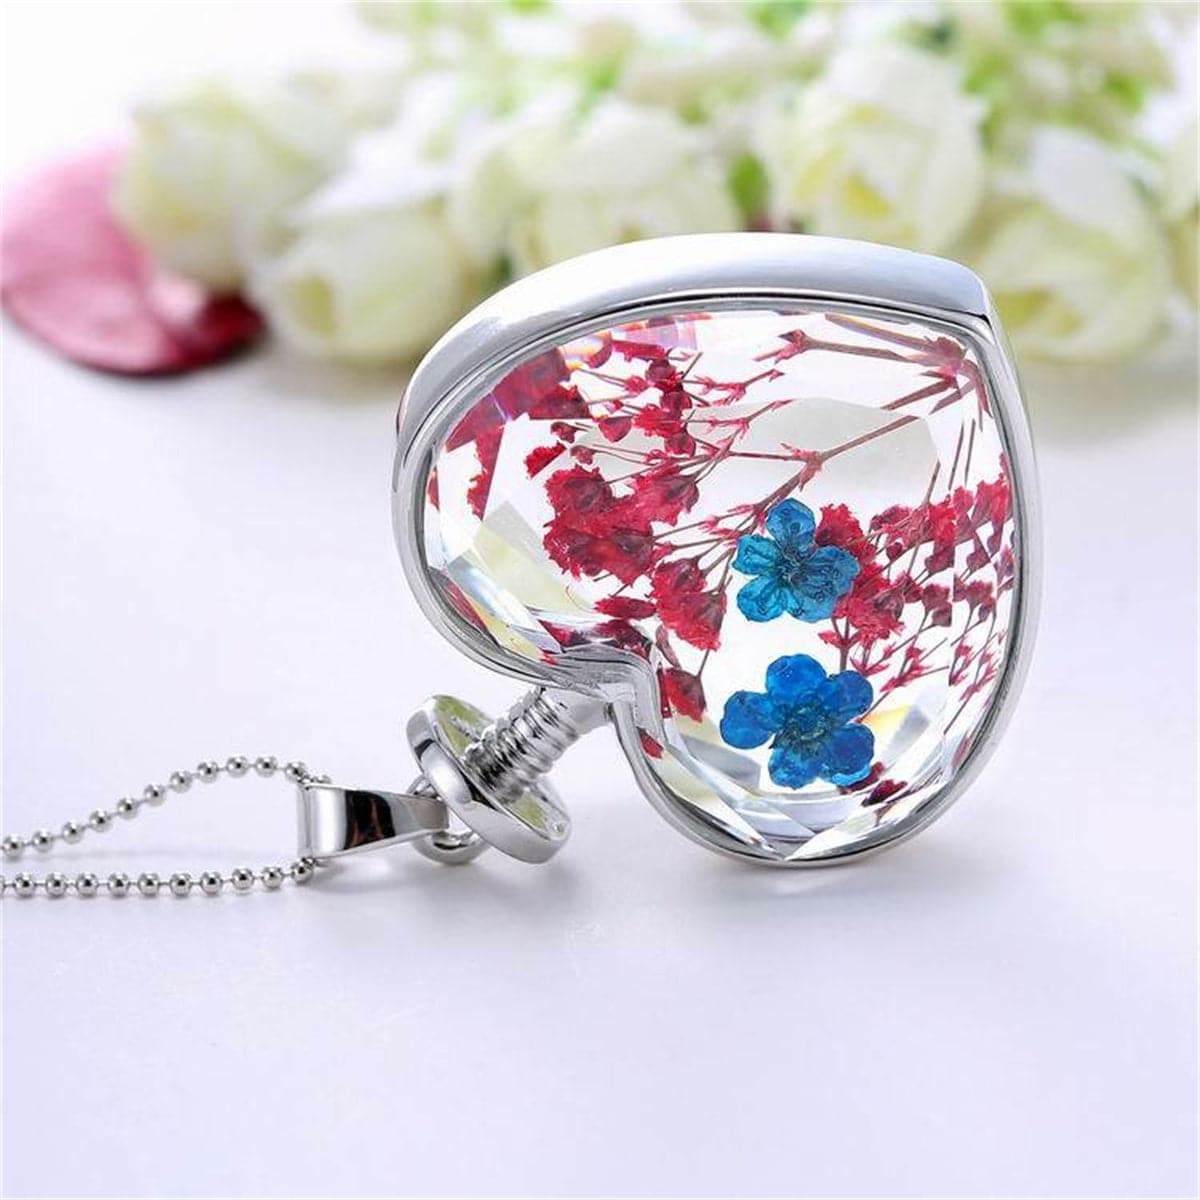 Blue Pressed Peach Blossom & Silver-Plated Heart Pendant Necklace